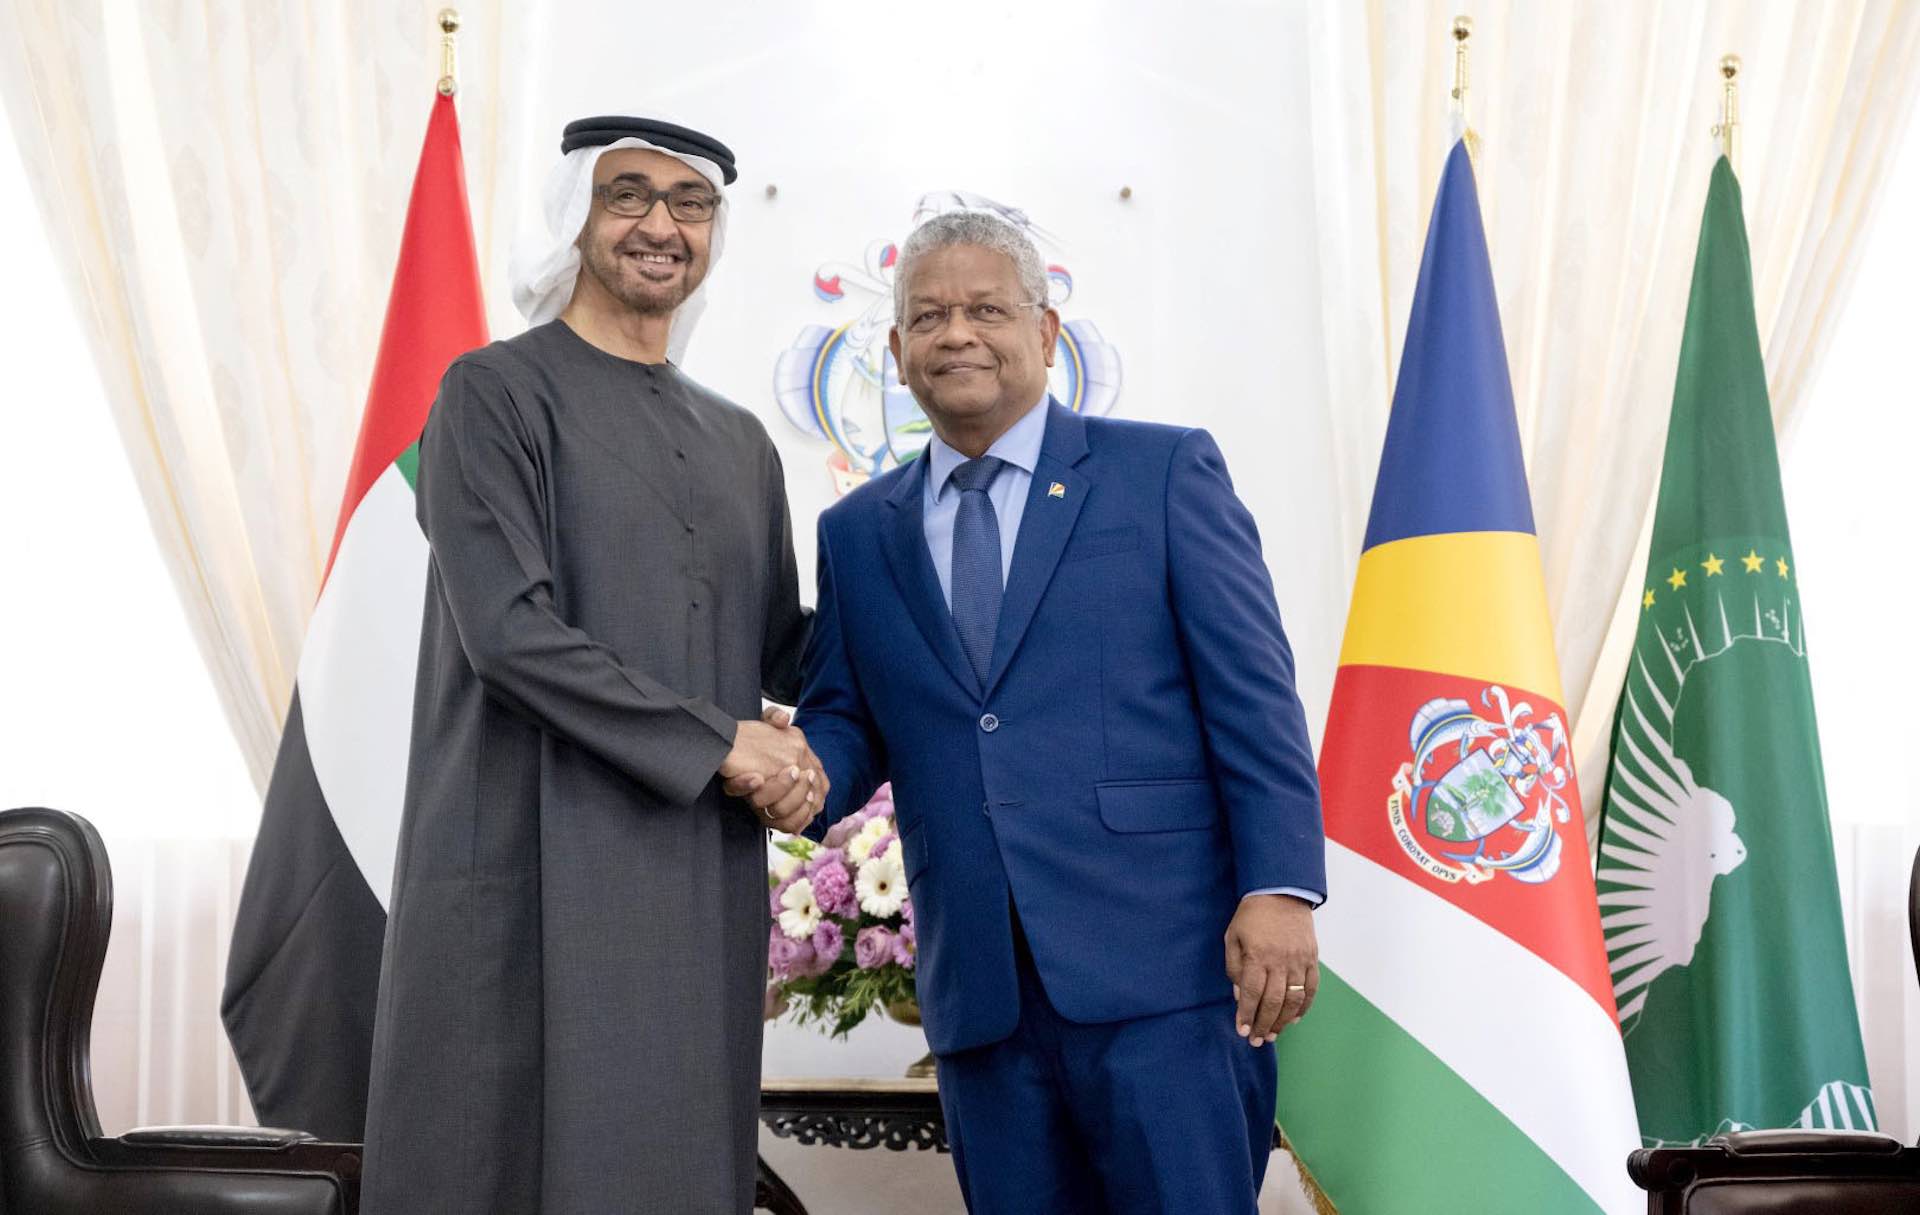 Seychelles President and Sheikh Mohamed bin Zayed discuss bilateral ties